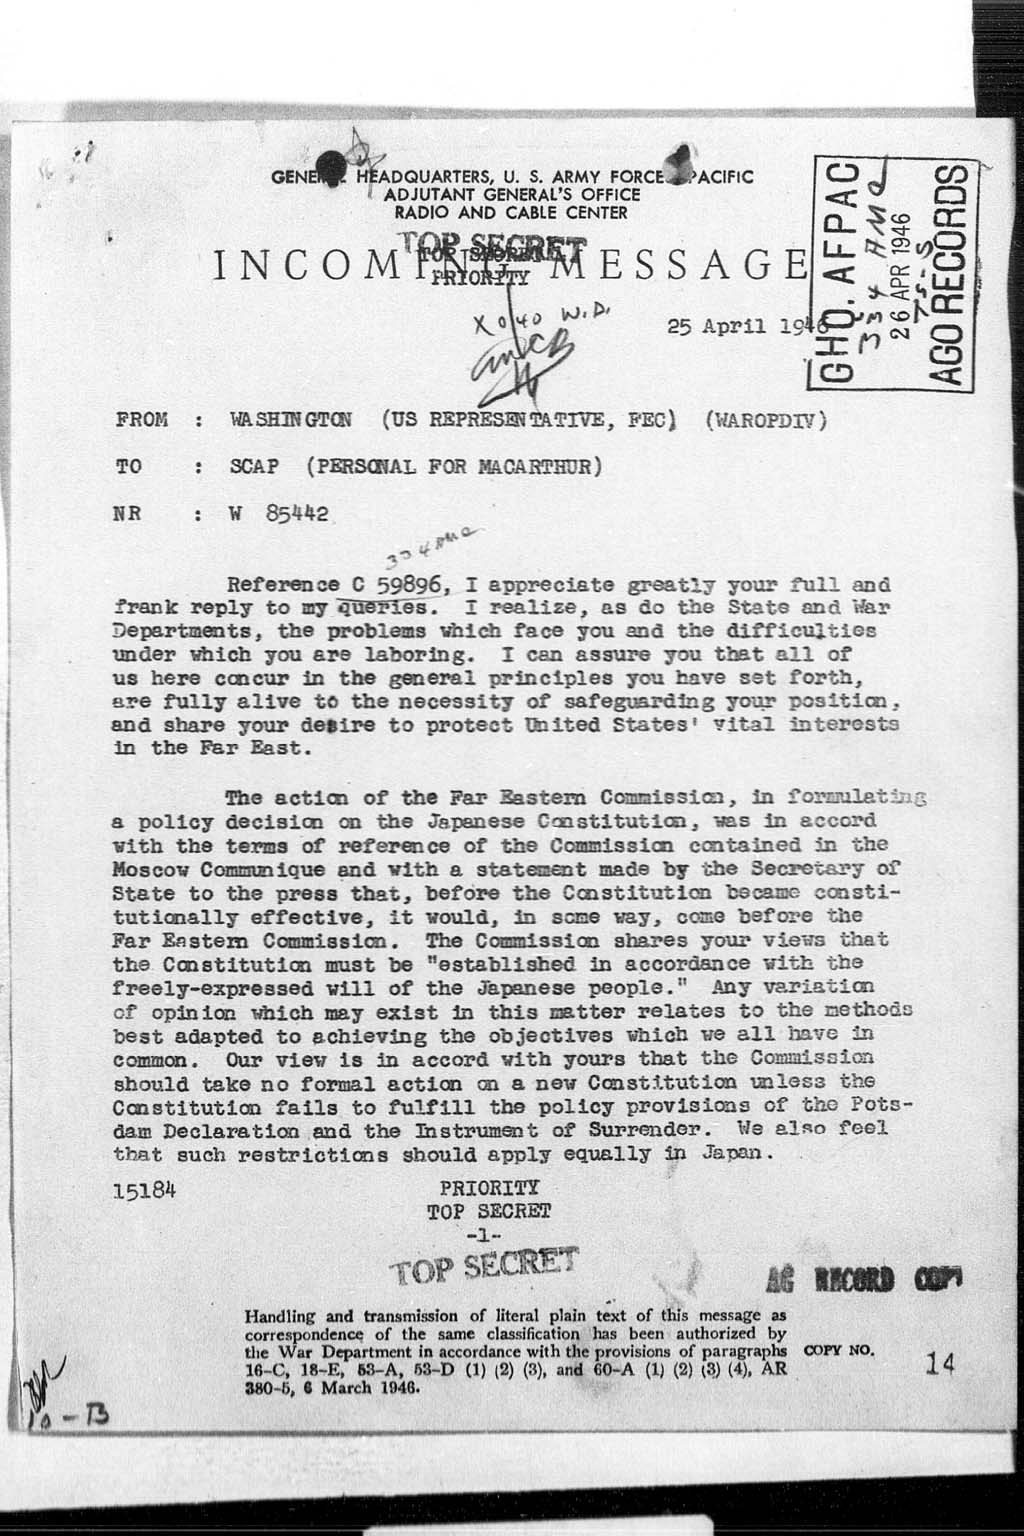 [Incoming Message from Washington (US representative, FEC) (WAROPDIV) to SCAP (Personal for MacArthur), nr W 85442, dated 25 April 1946](Larger image)